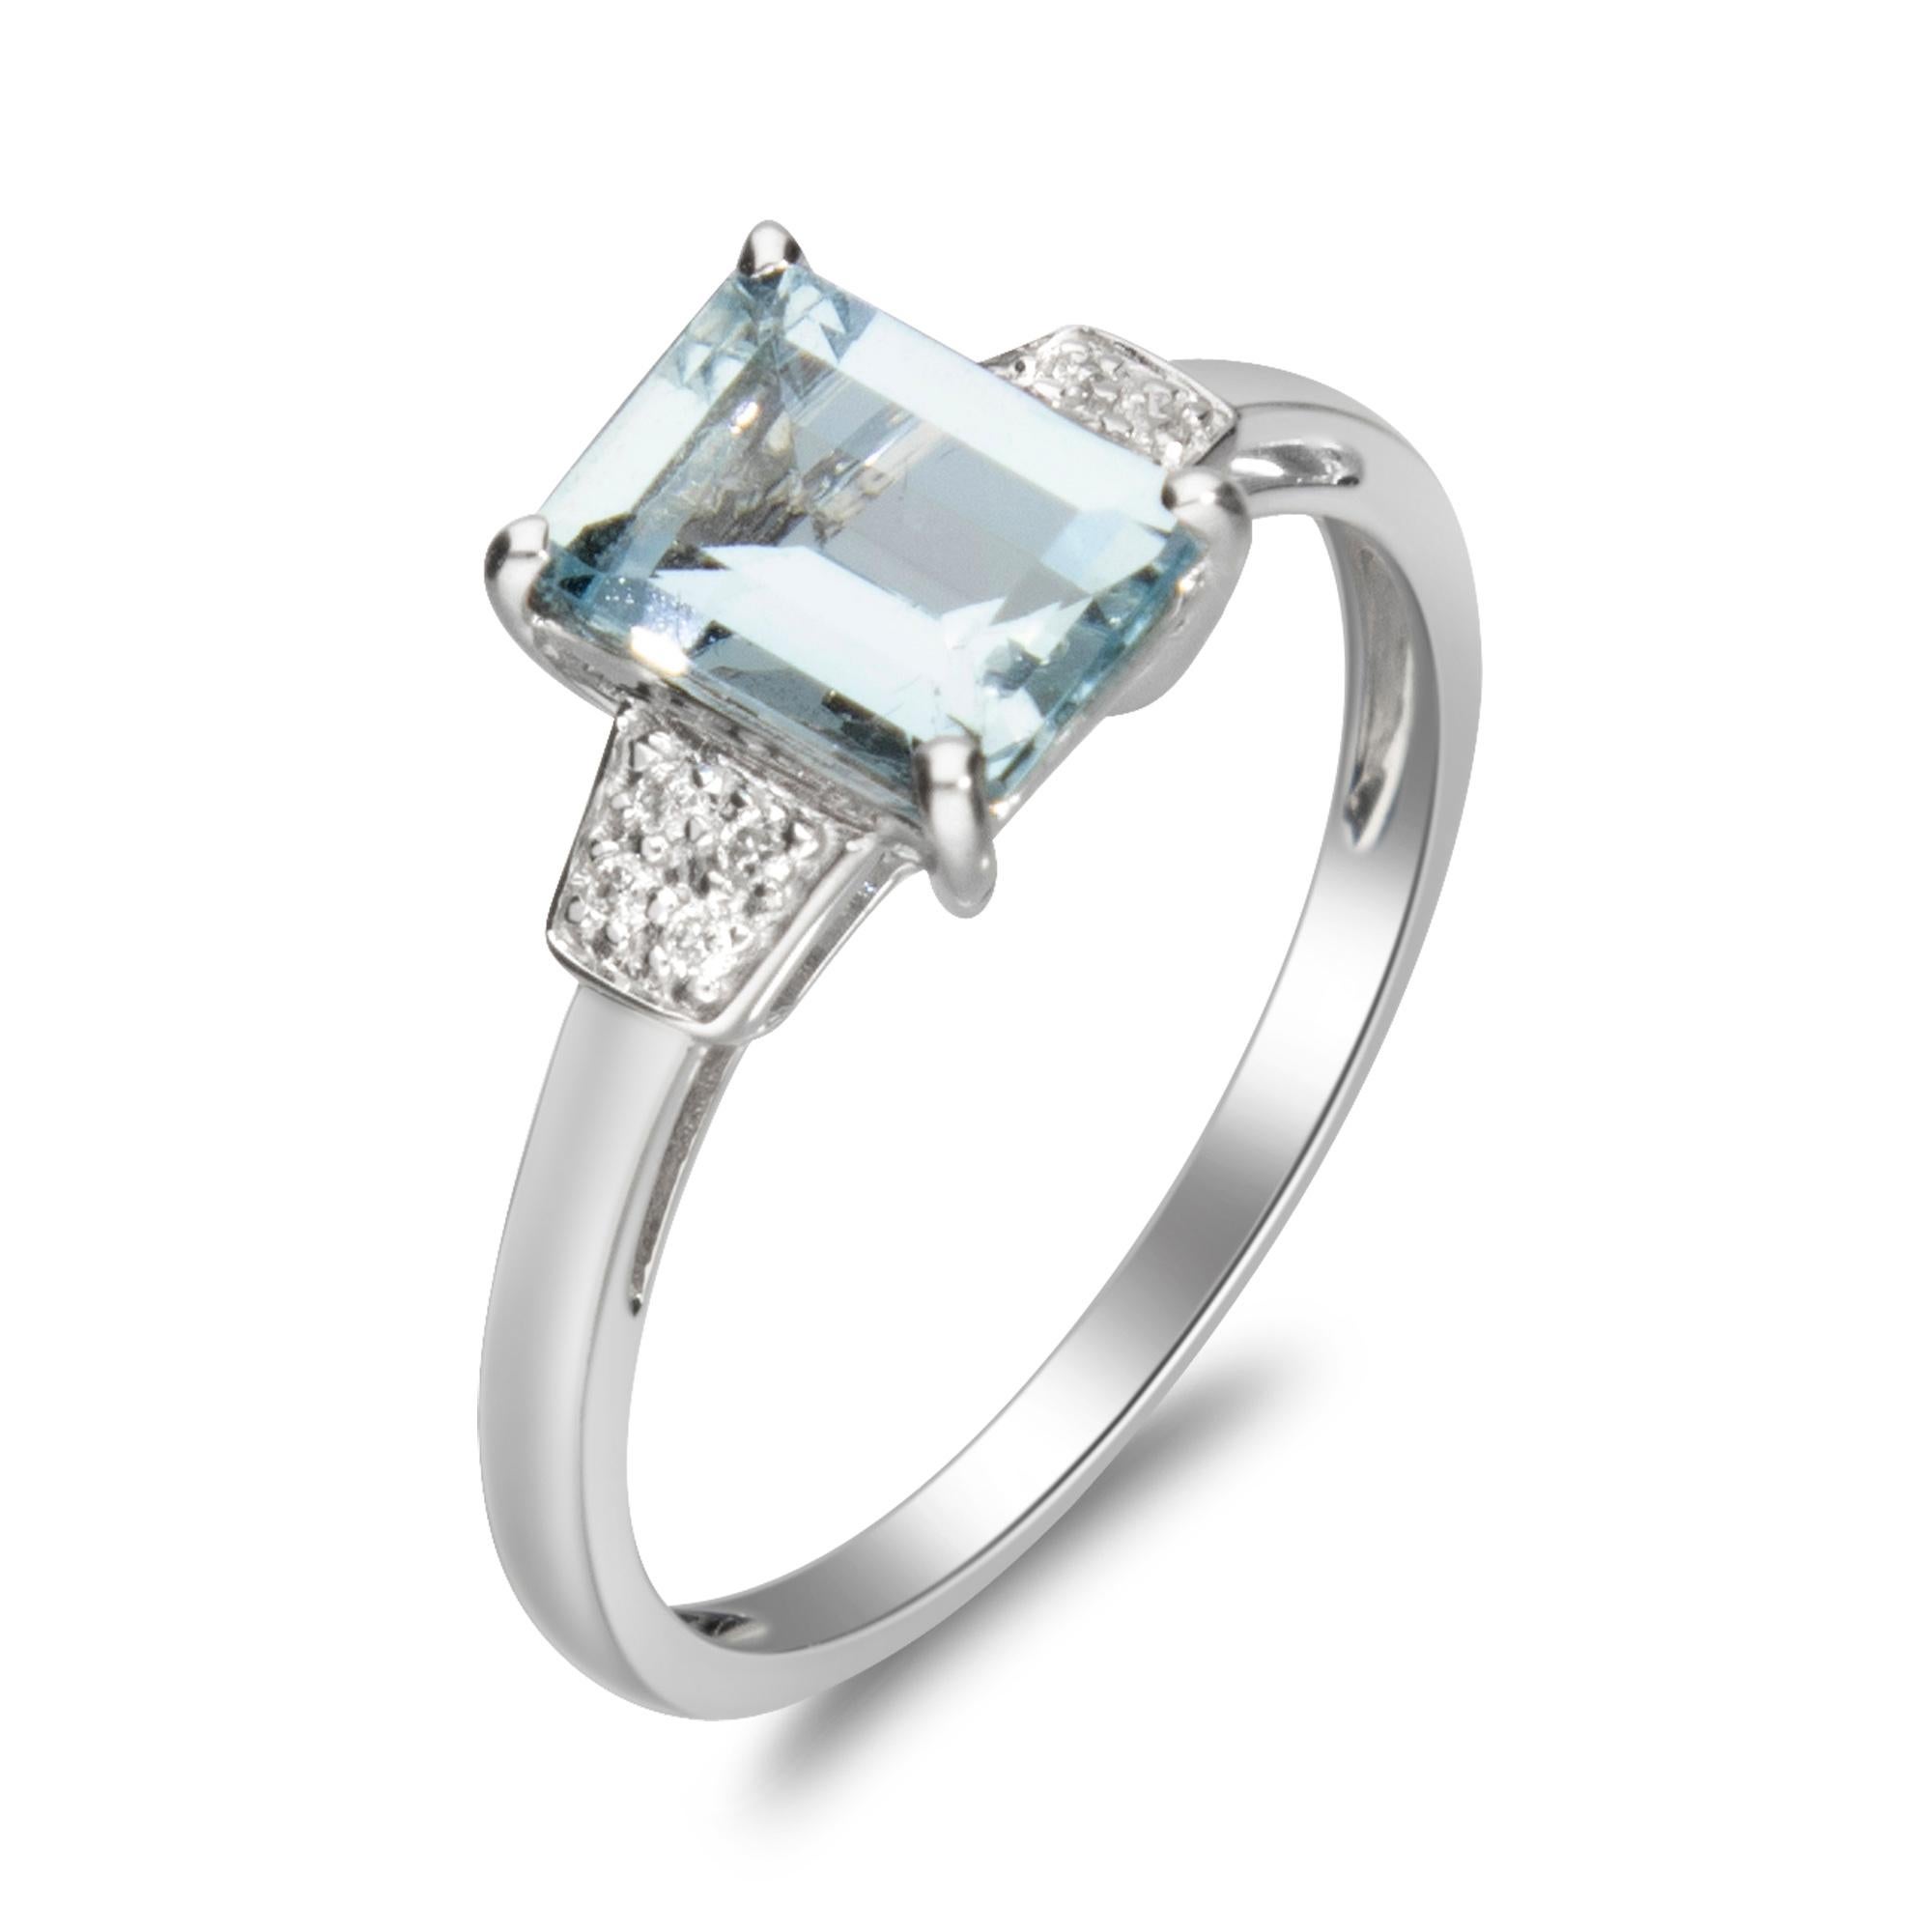 1.25 Carat Aquamarine Emerald Cut Diamond Accents 10K White Gold Engagement Ring In New Condition For Sale In New York, NY